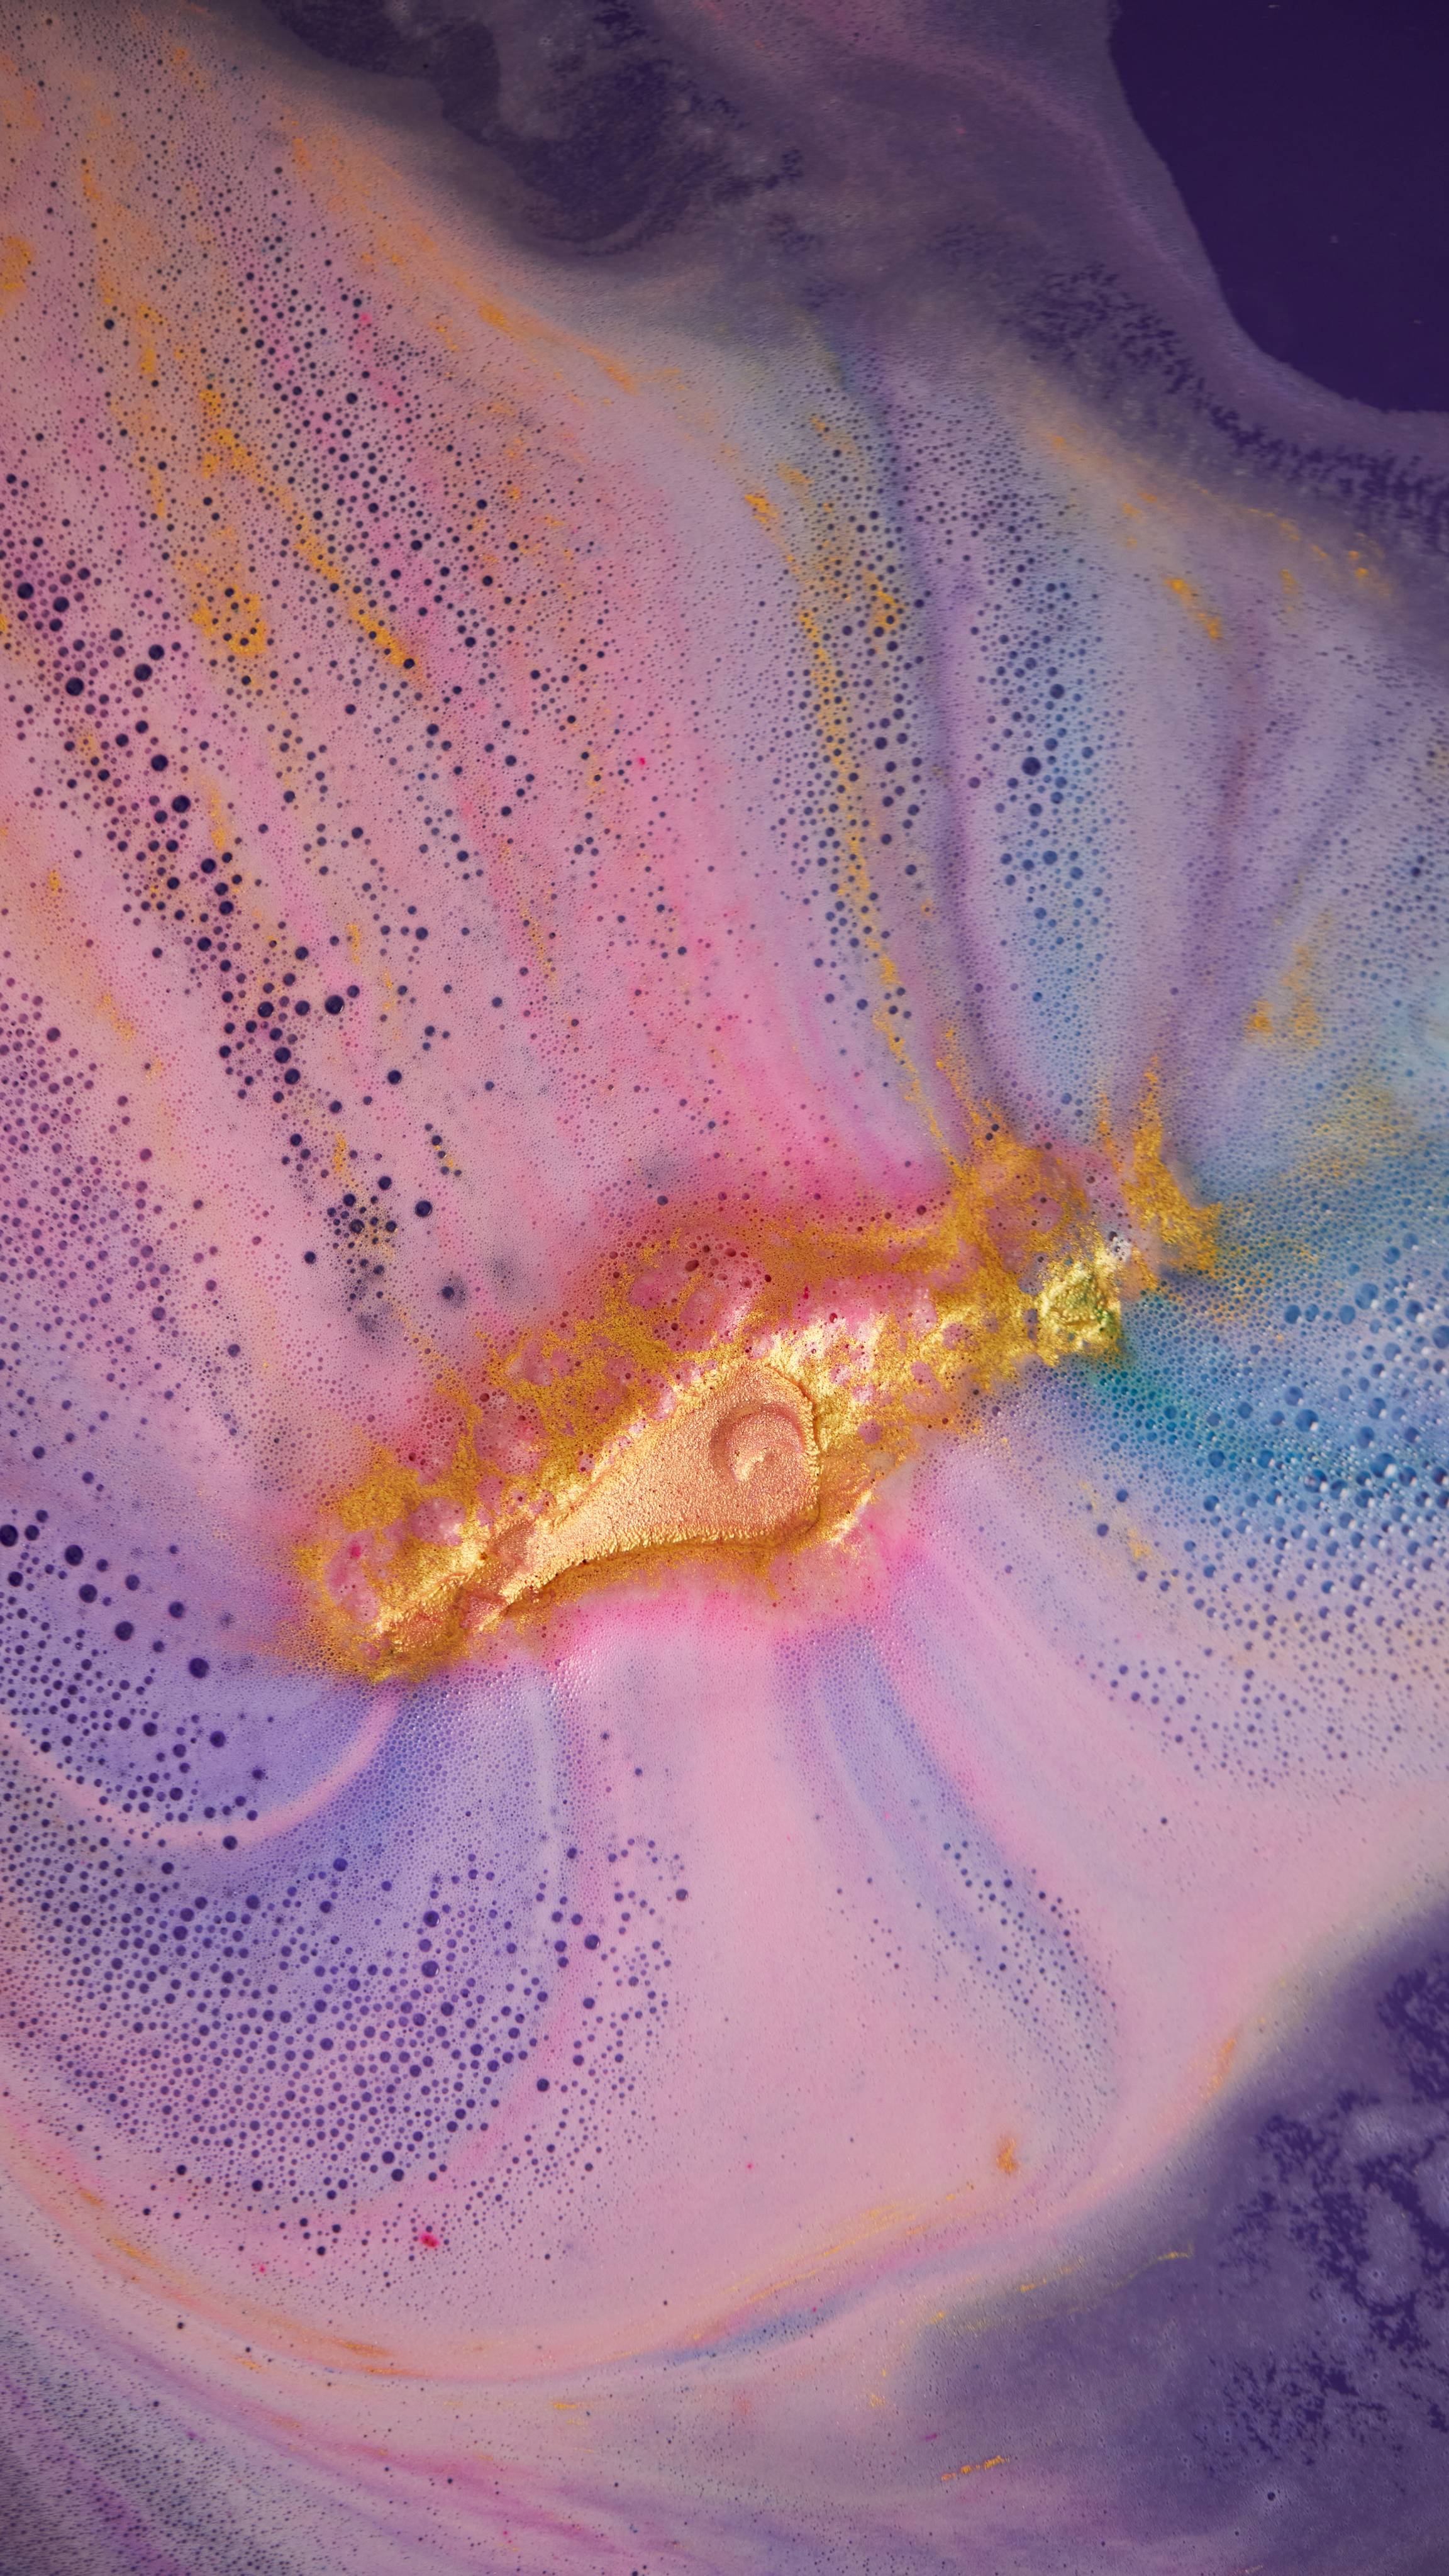 Only a small flicker of golden shimmer remains among a sea of pink, blue and purple velvet foam with gold sparkles.